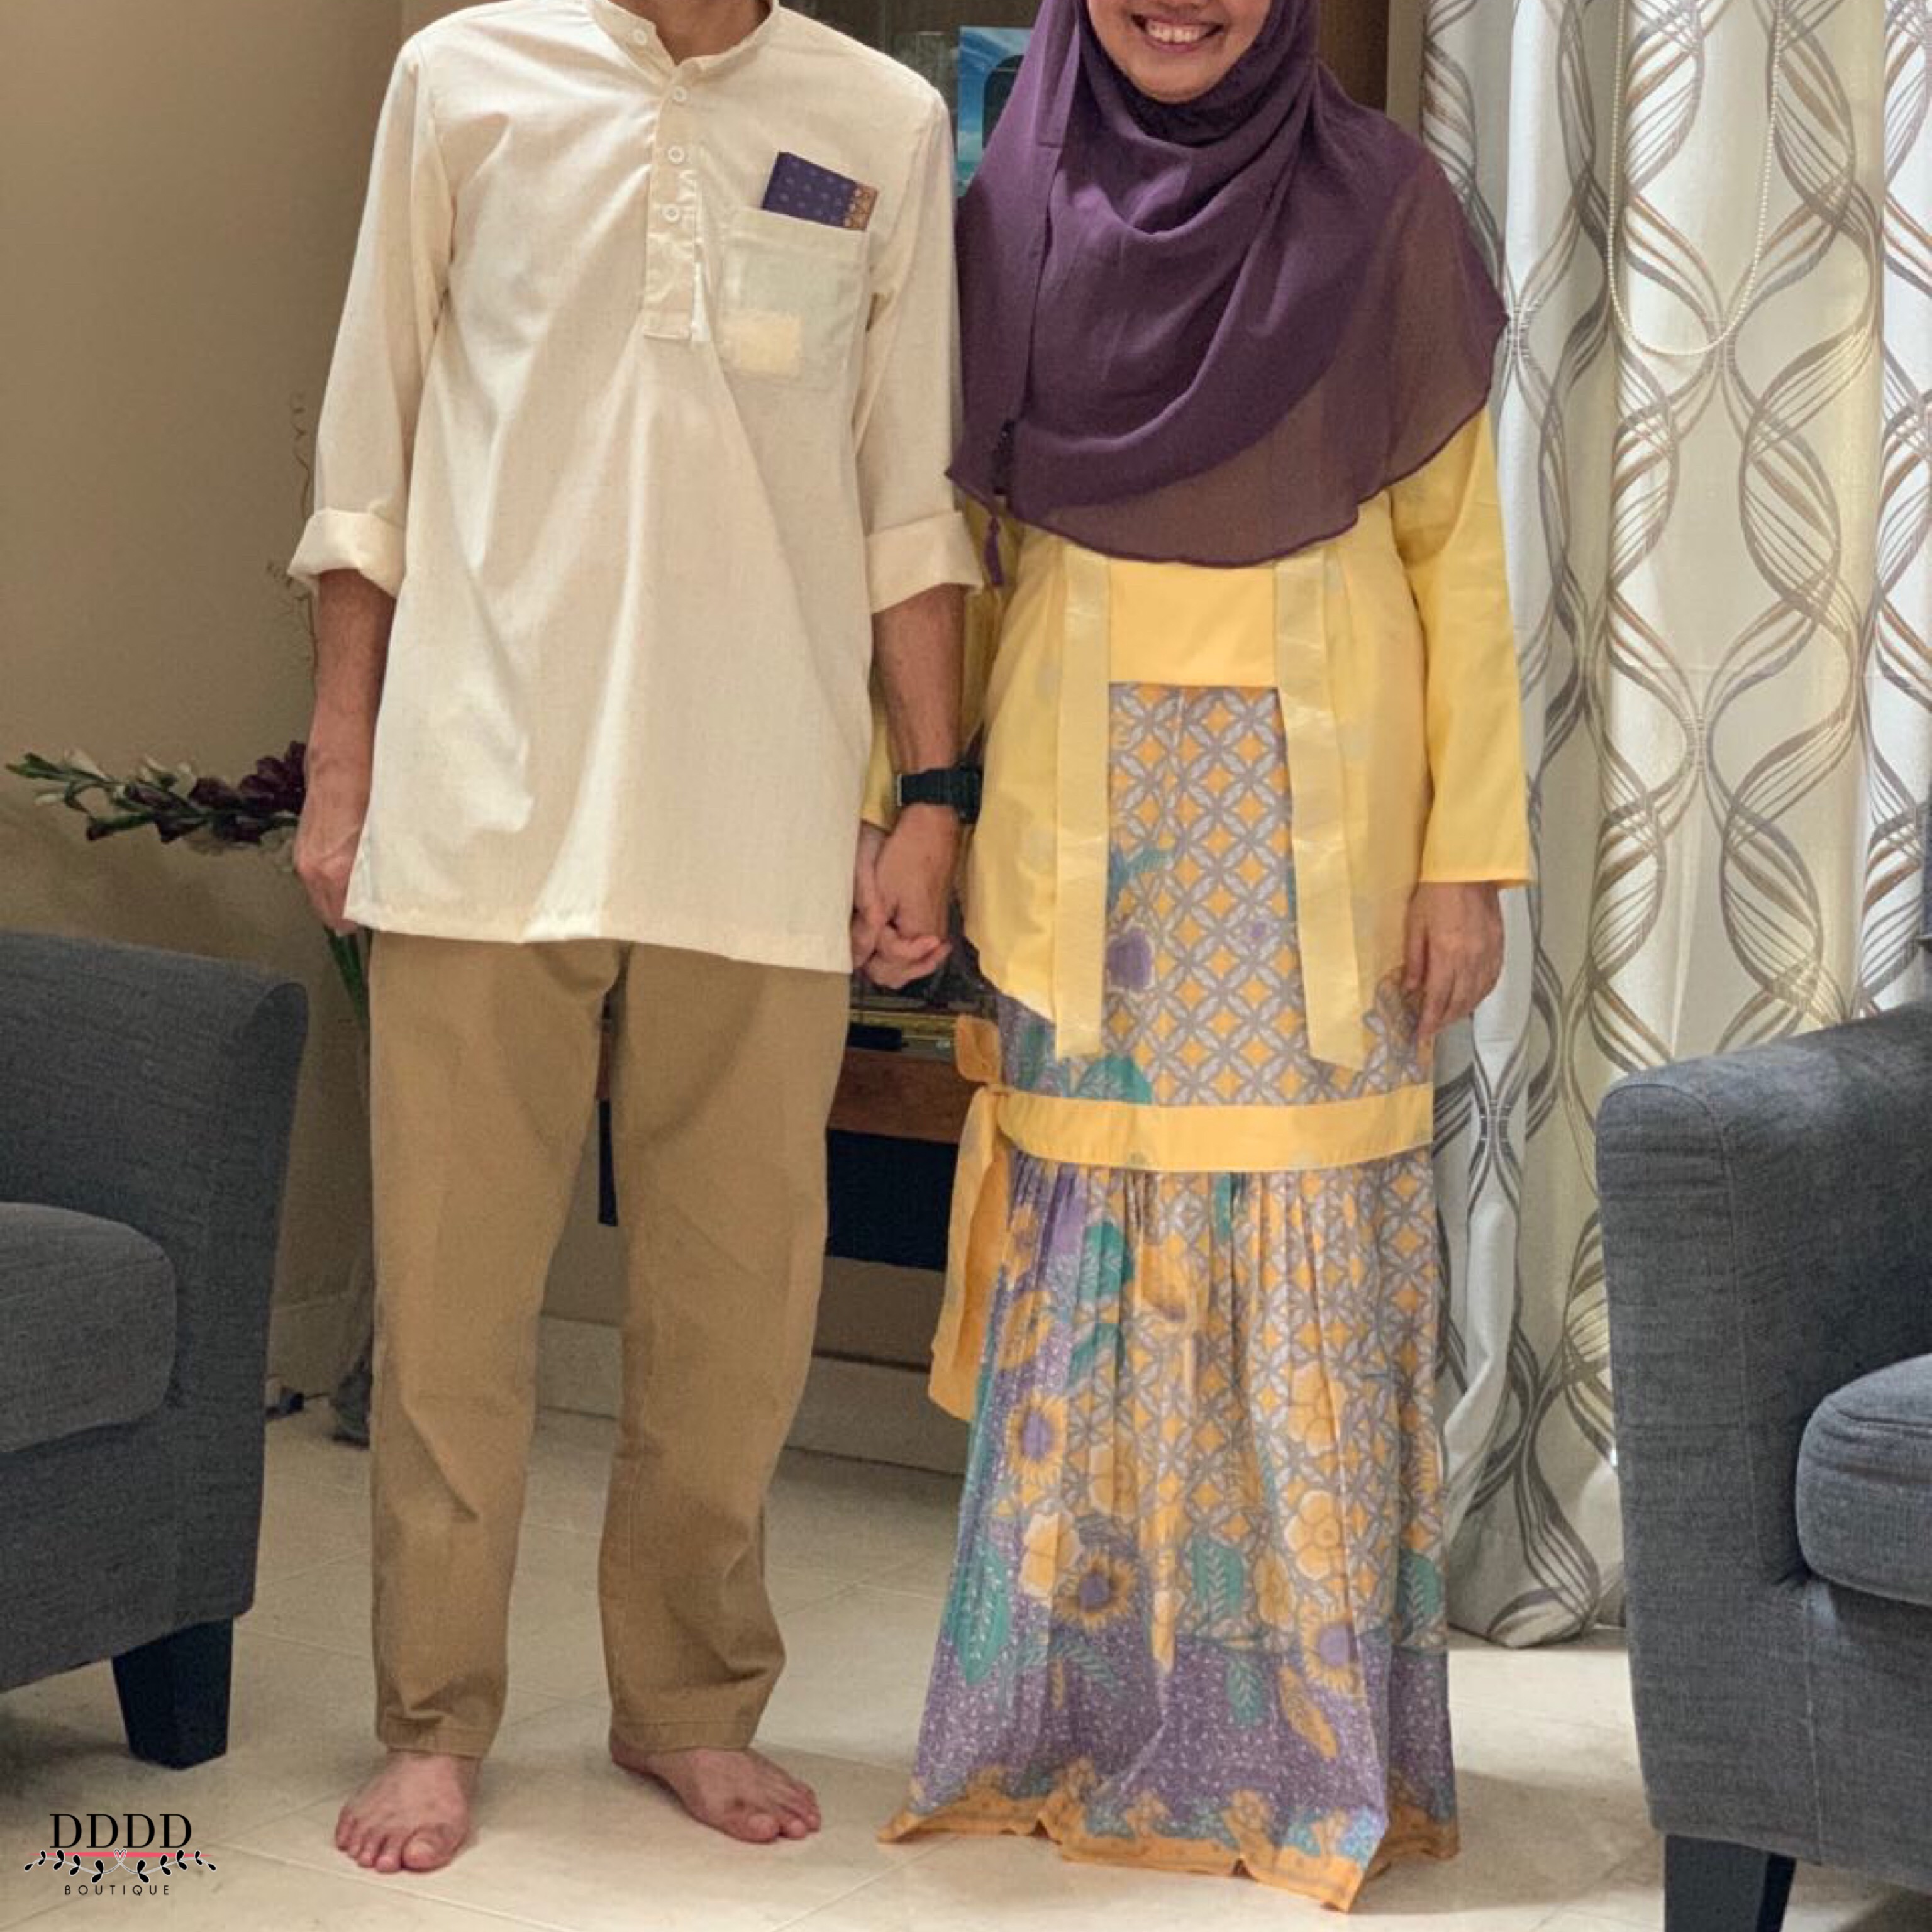 This lovely couple in custom-made Raya pieces.